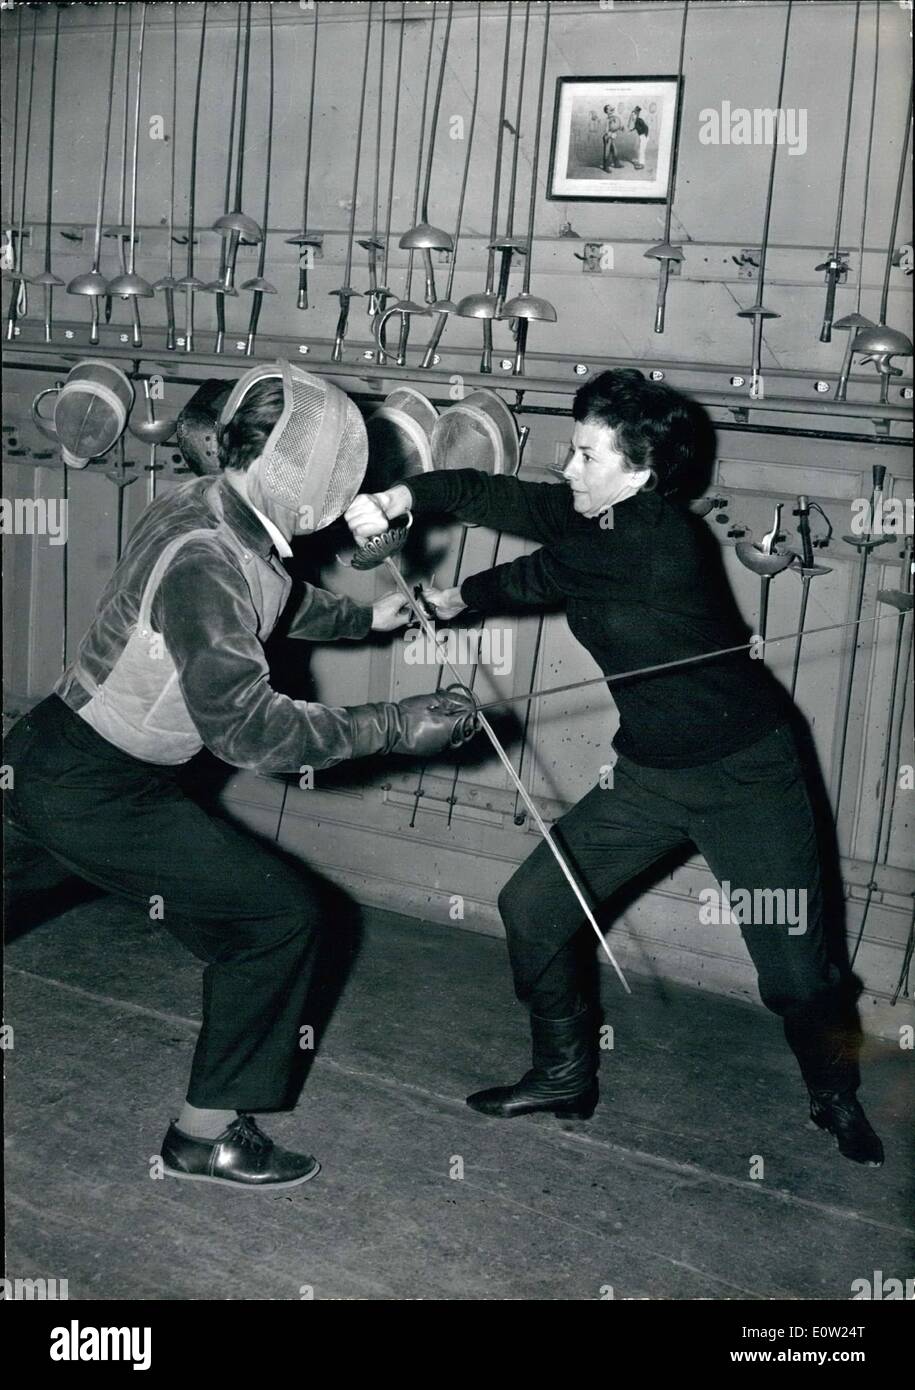 Feb. 02, 1961 - Famous Actress Taken Up Fencing: Suzanne Flon, the Famous French actress, has been taking fencing lessons for the next role in the ''Kings' Night'' to be staged at Vieux-Colombiers. Phot Shows Suzanne Colombier facing with her trainer. Stock Photo